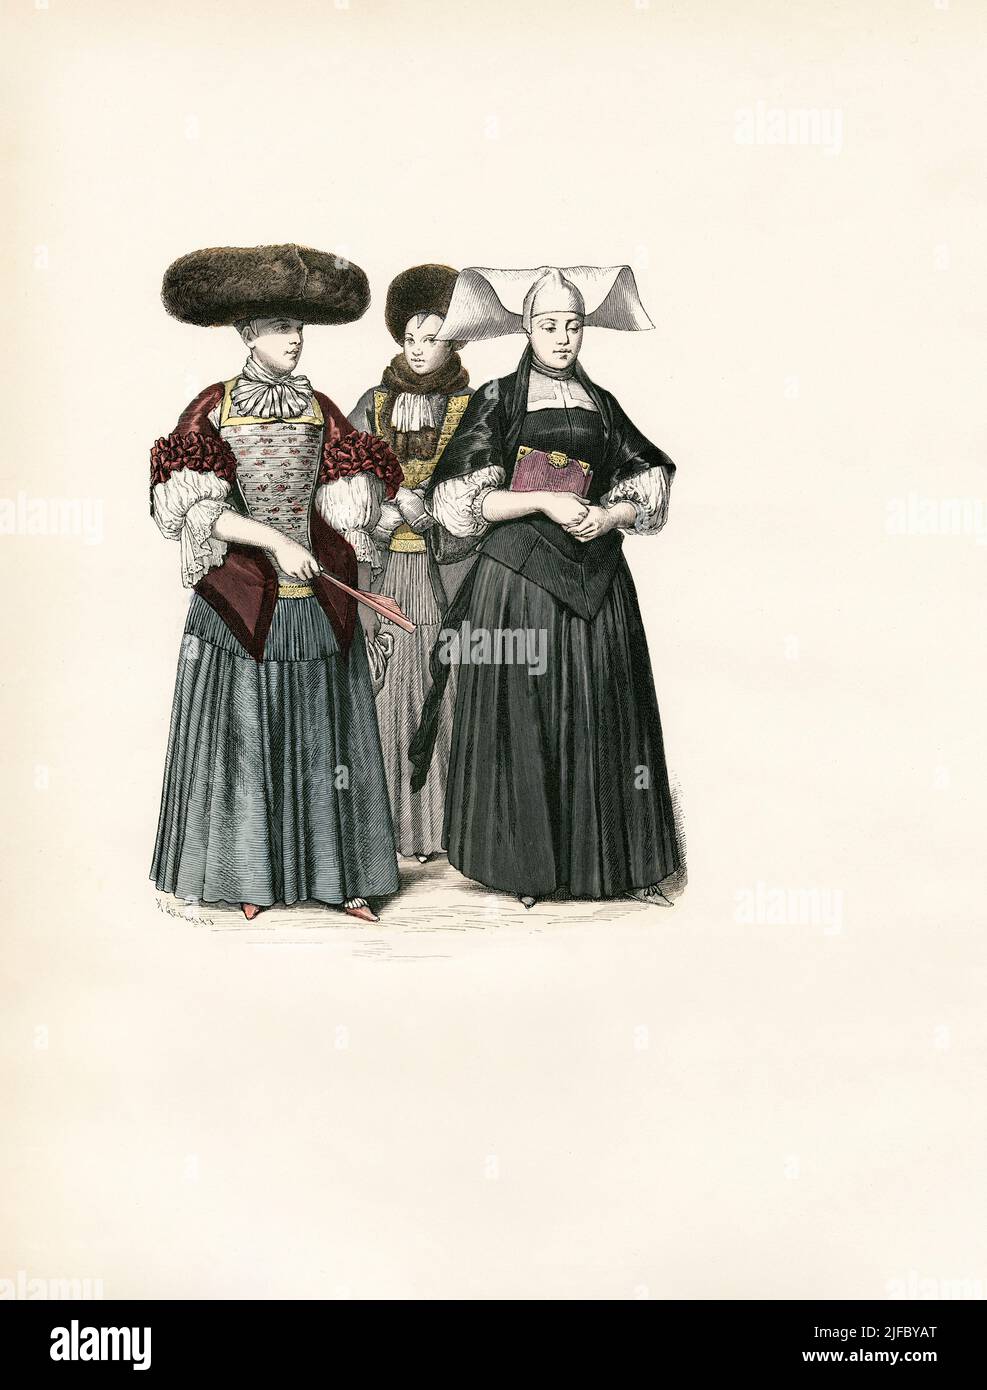 Woman with Broad Hat, Woman in Winter Dress, Woman in Mourning (1670), Strasbourg, 17th Century, Illustration, The History of Costume, Braun & Schneider, Munich, Germany, 1861-1880 Stock Photo